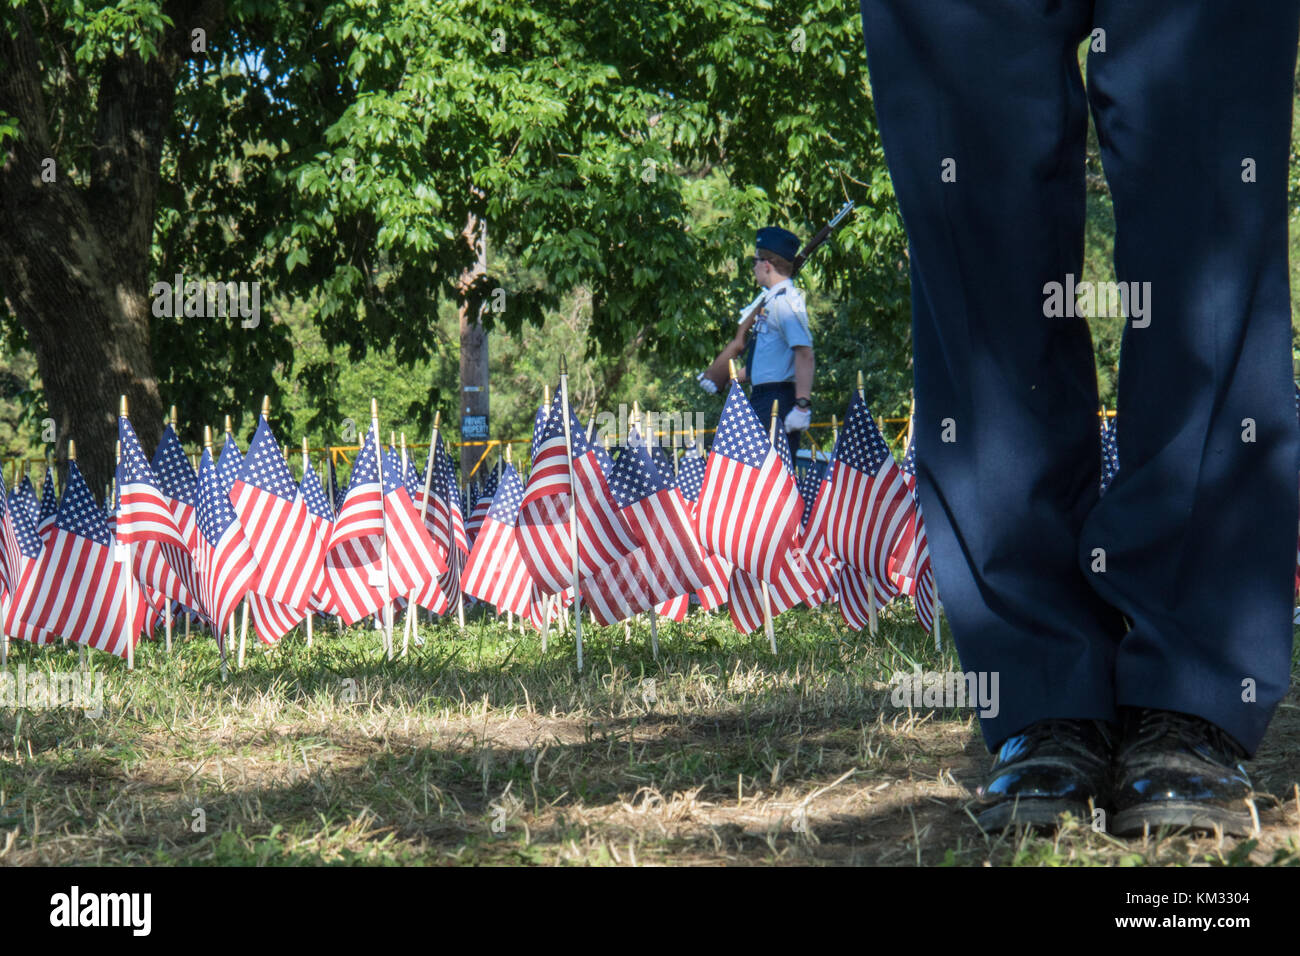 Honor guard standing watch over a field of American flags honoring the US military Stock Photo